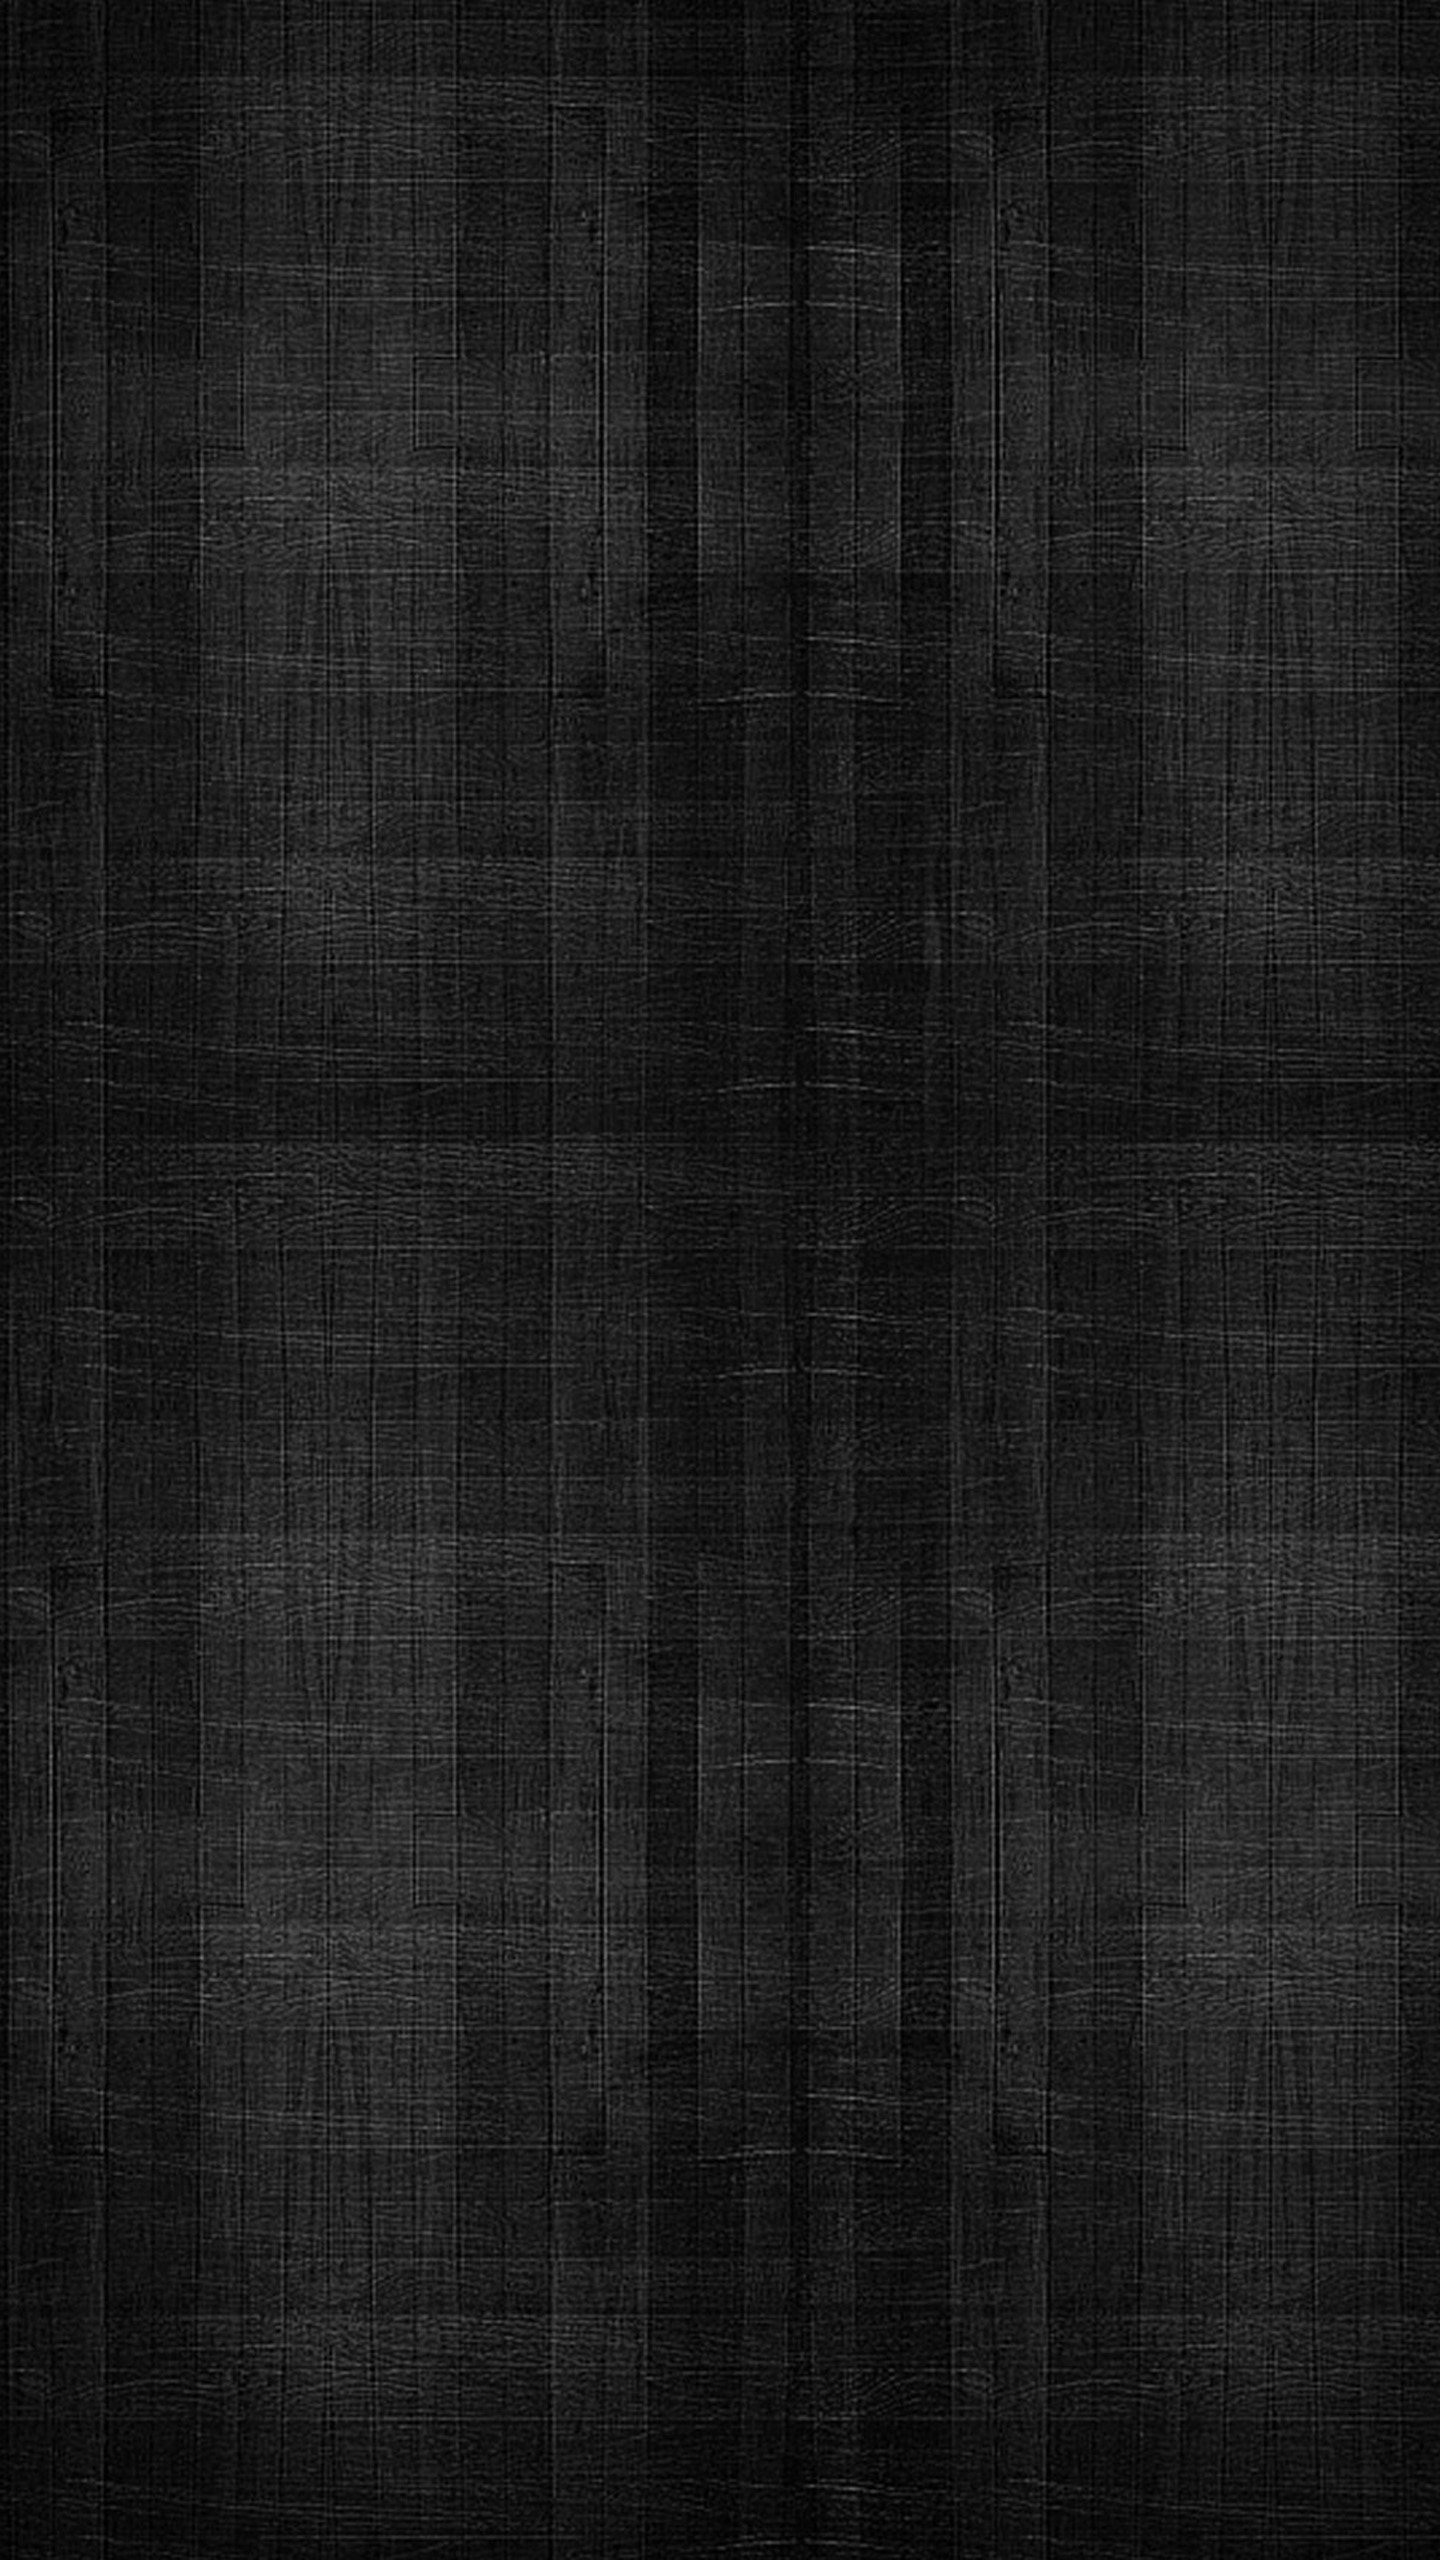 Aggregate more than 55 gray wallpaper aesthetic best - in.cdgdbentre